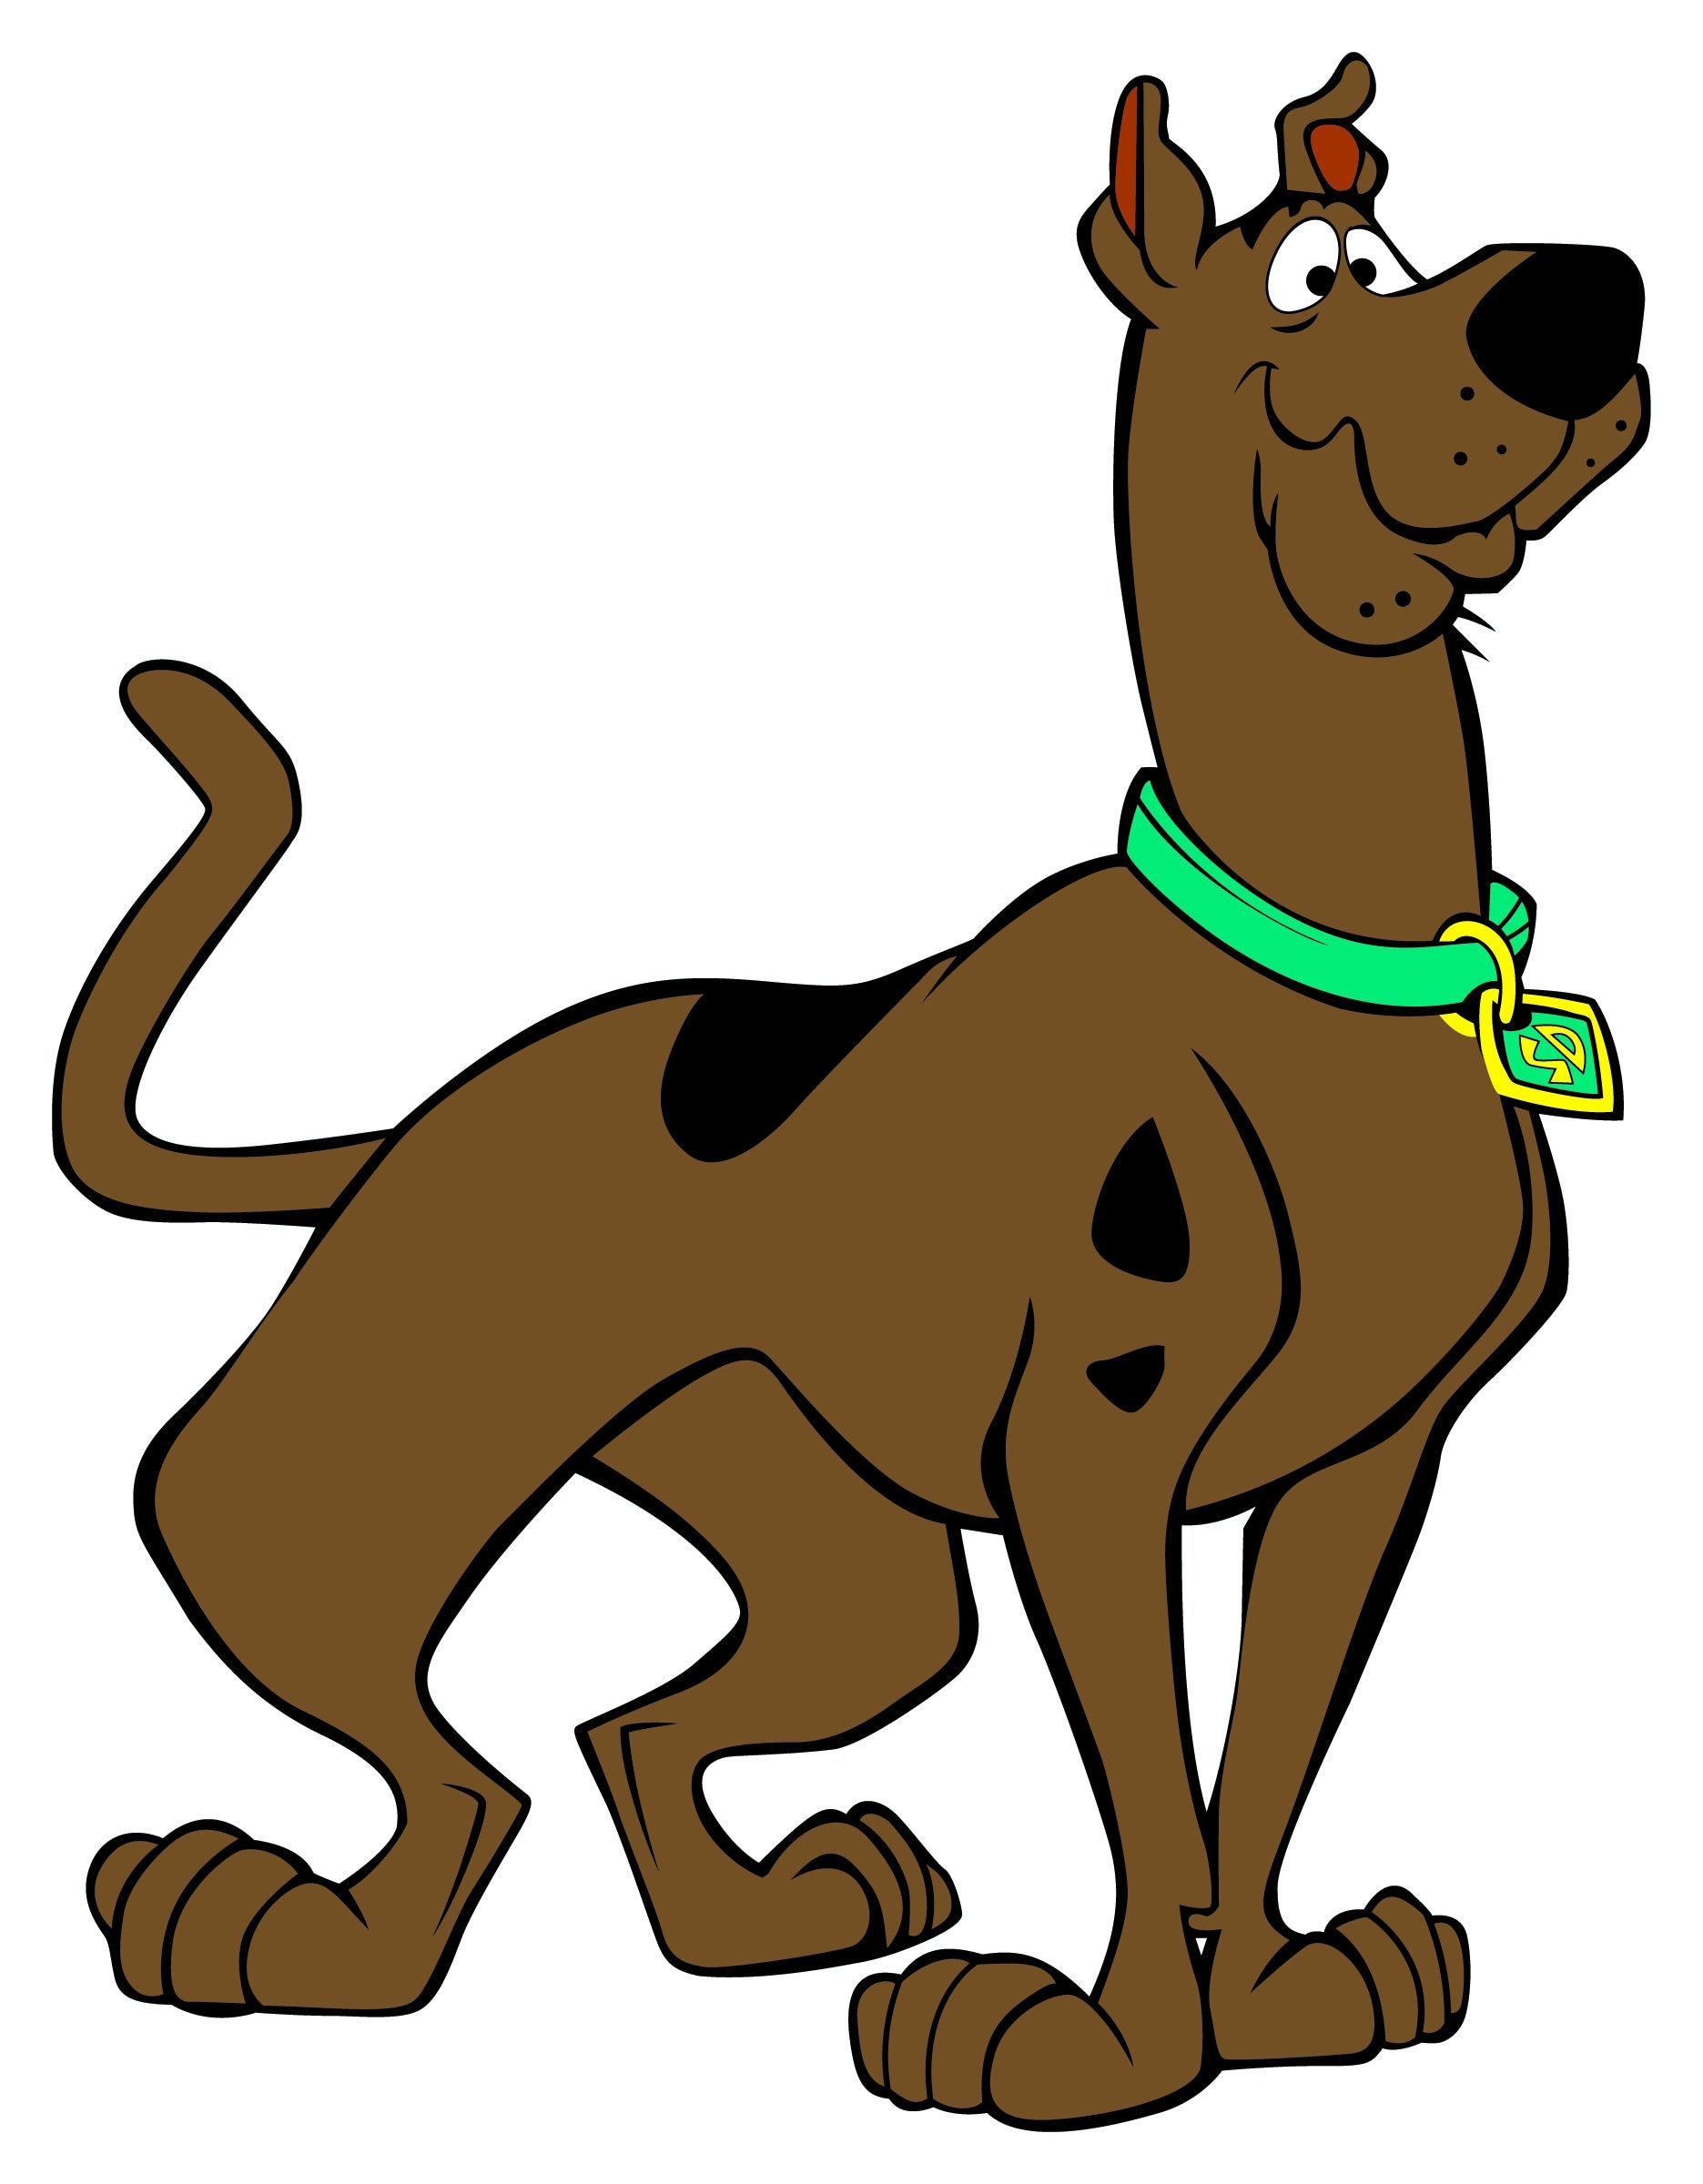 Scooby Doo Vinyl Decal / Sticker 10 sizes!! fr€€ Shipping